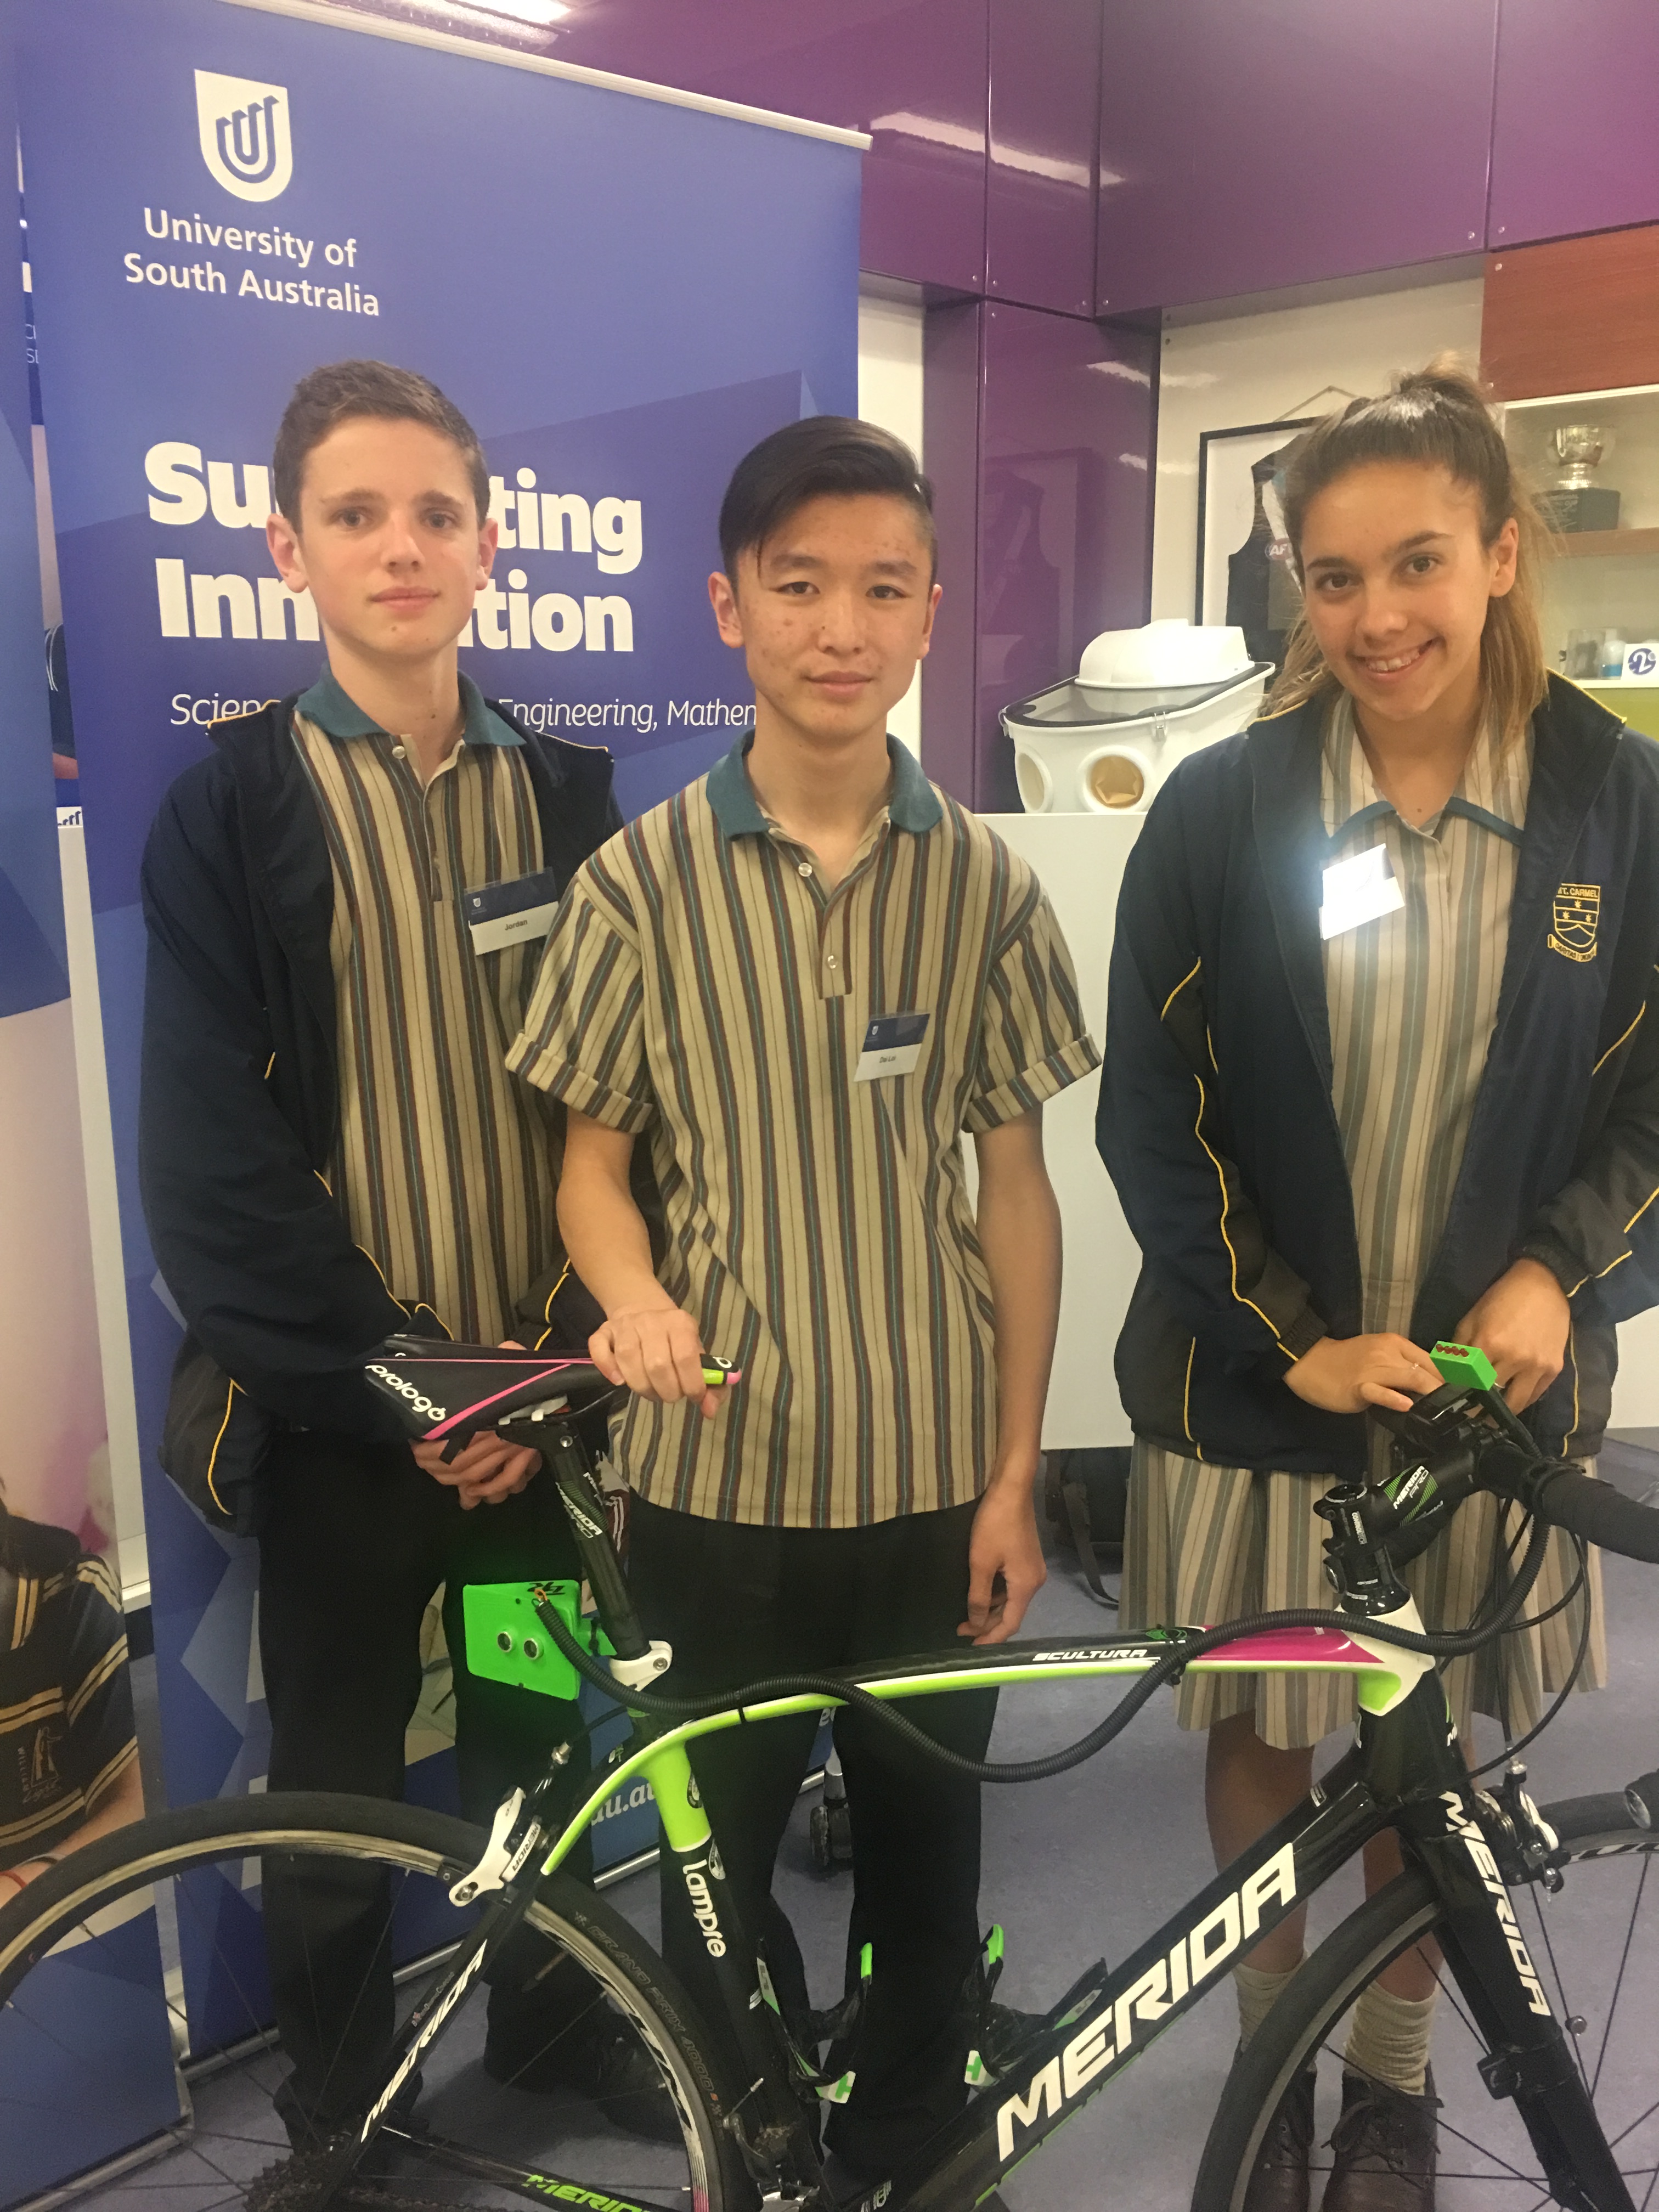 Students standing next to a bike engineered with sensors to indicate when cars are too close